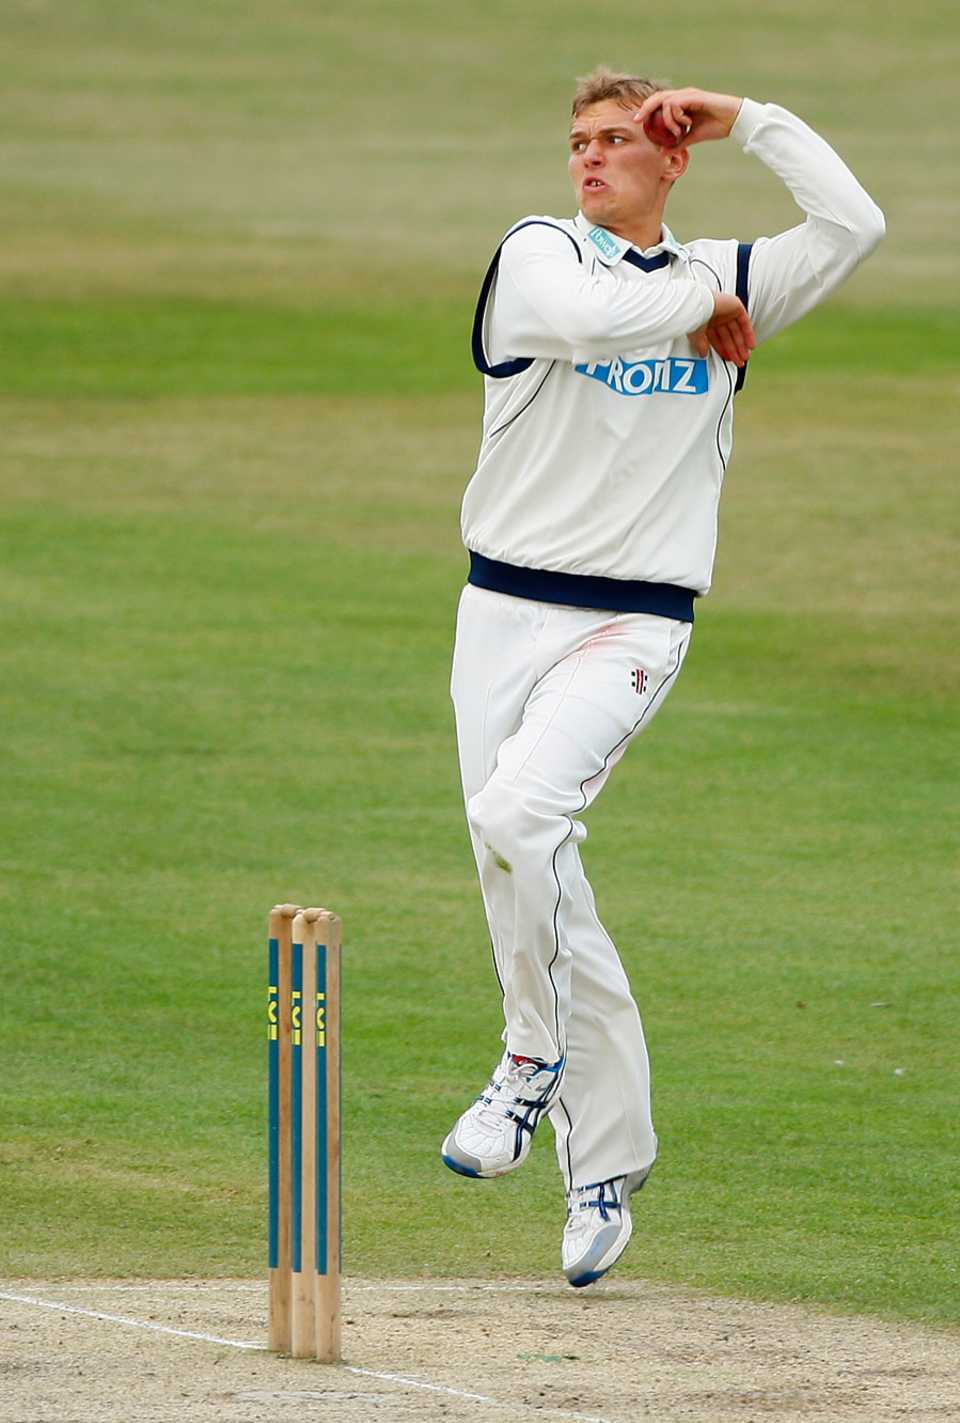 Danny Briggs helped Hampshire keep Sussex in check